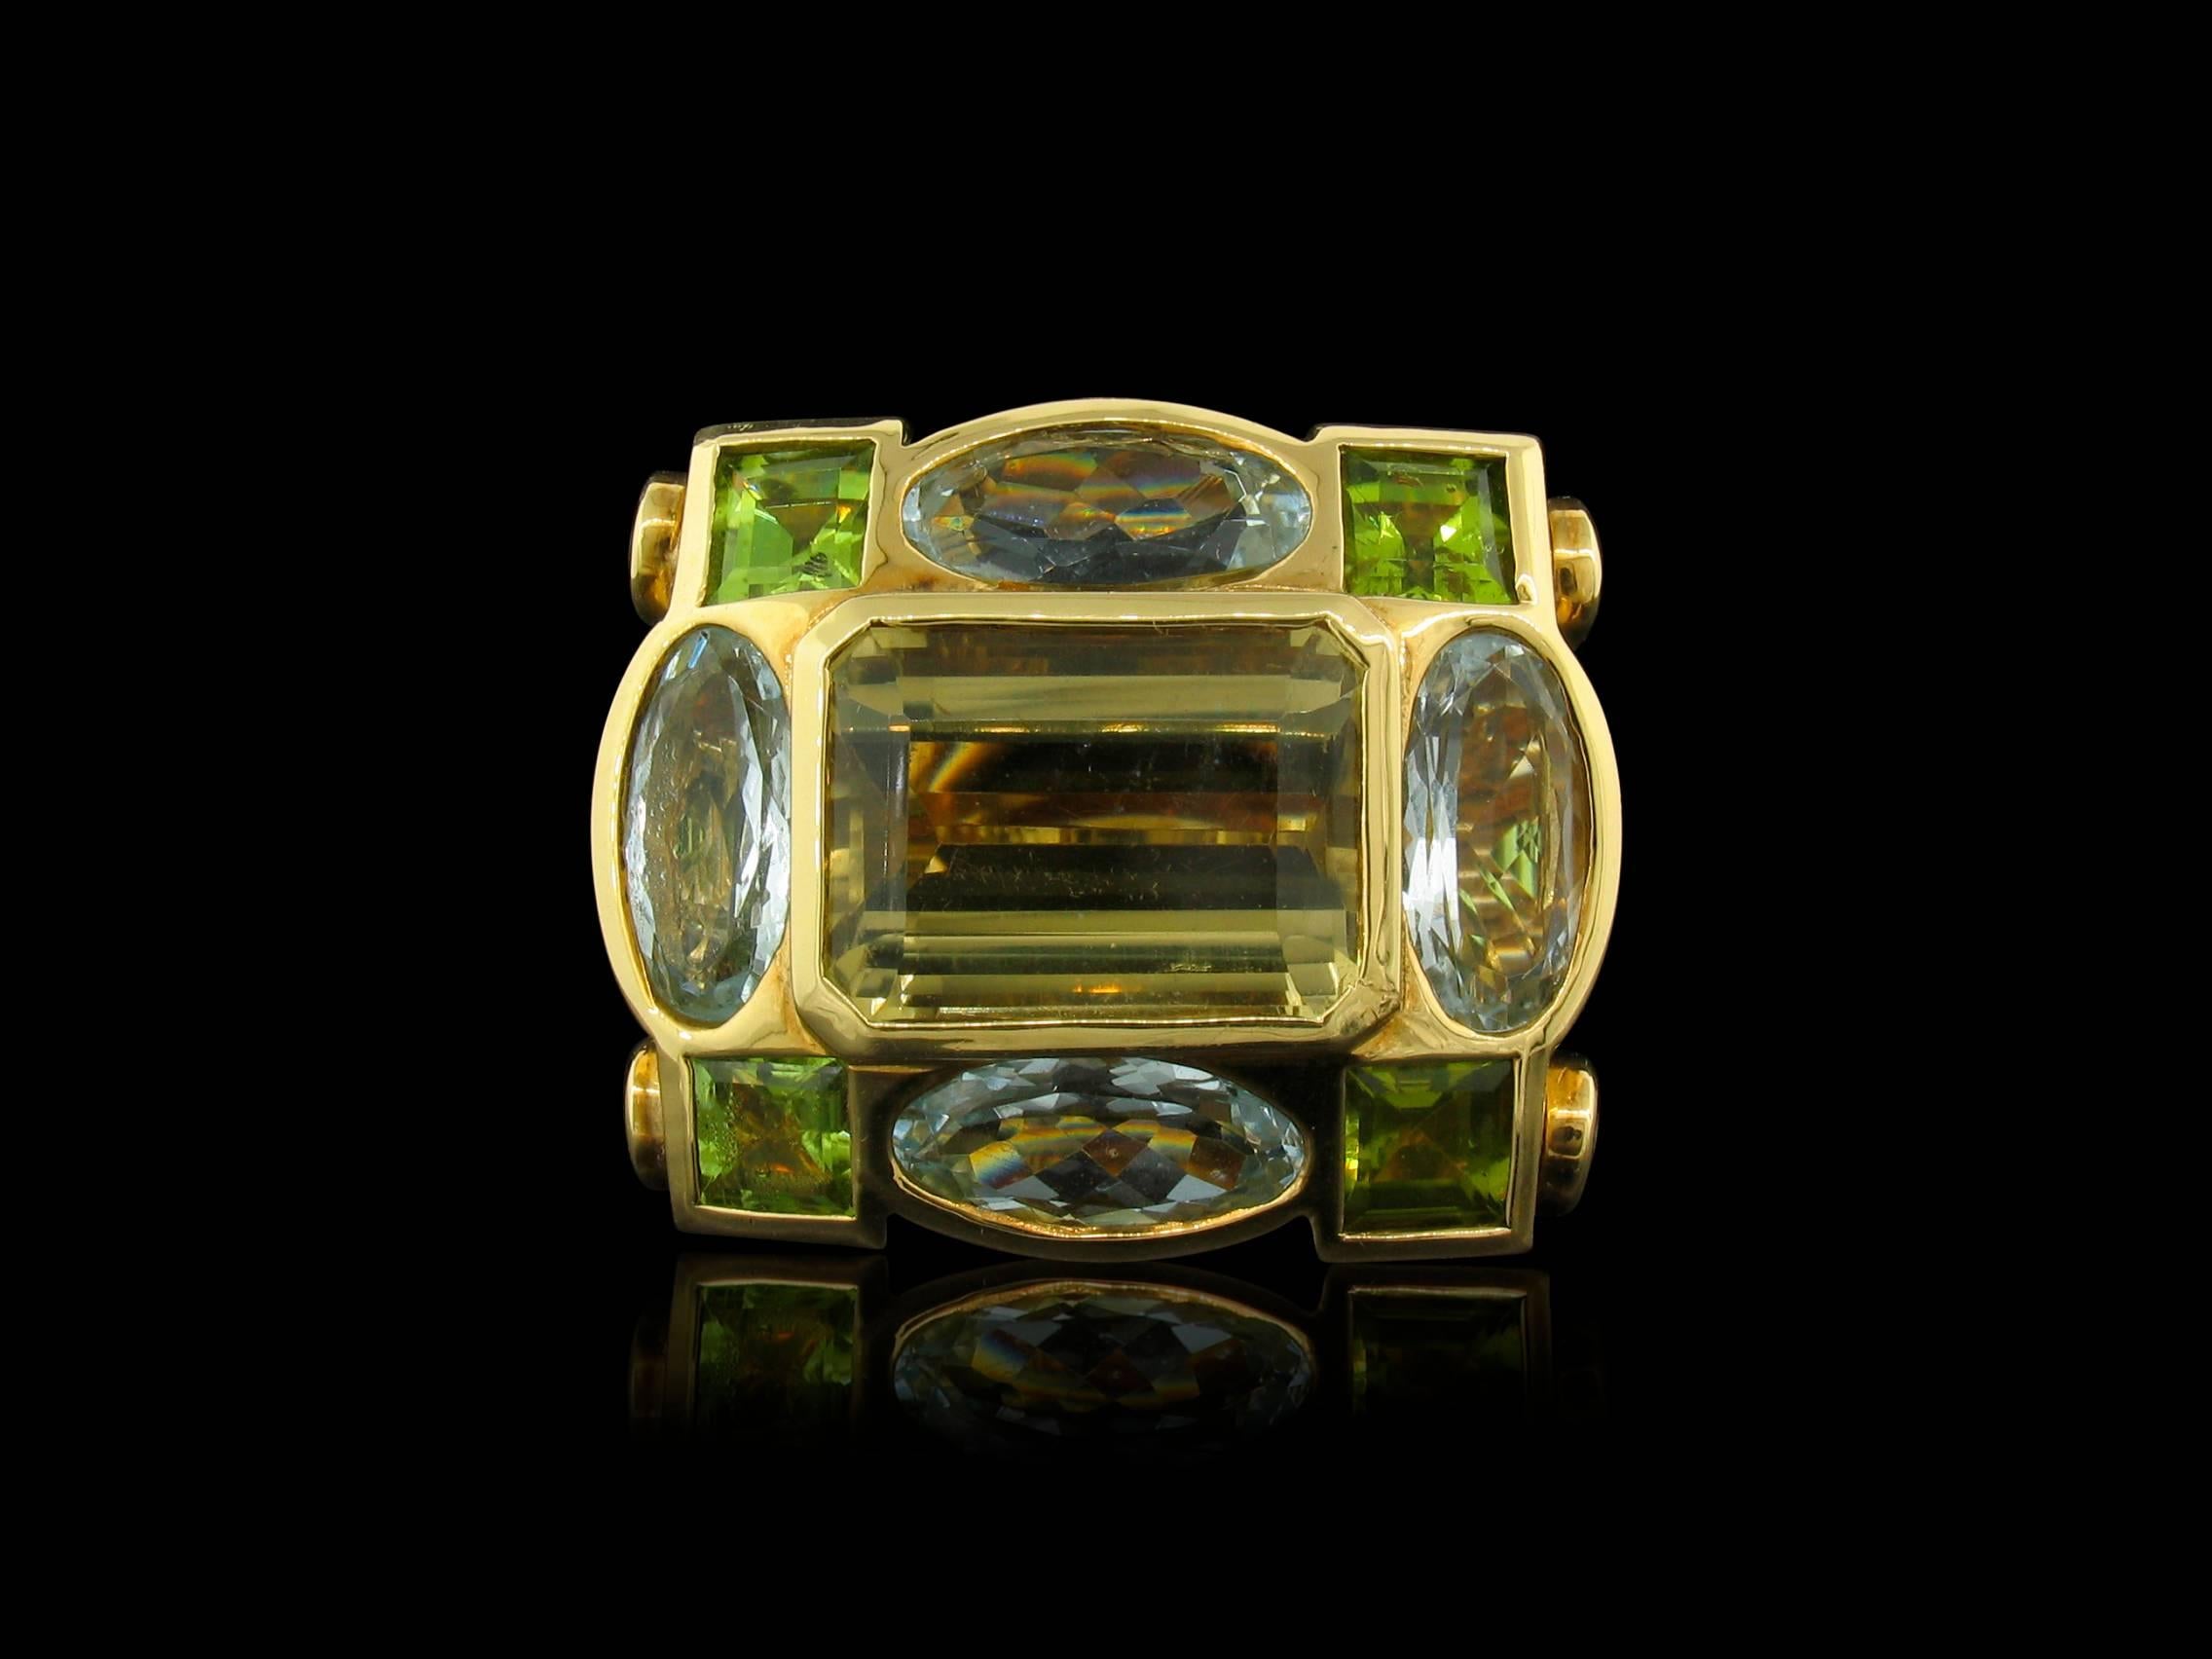 Tony Duquette Citrine, Aquamarine and Peridot Ring in 18K Gold. This amazing jewel has a total weight of 17 carats of Citrine, 11 carats of Aquamarine, and 8 carats of Peridot. Size 6 3/4, fits a size 7 1/4.

Tony Duquette was a well-known painter,